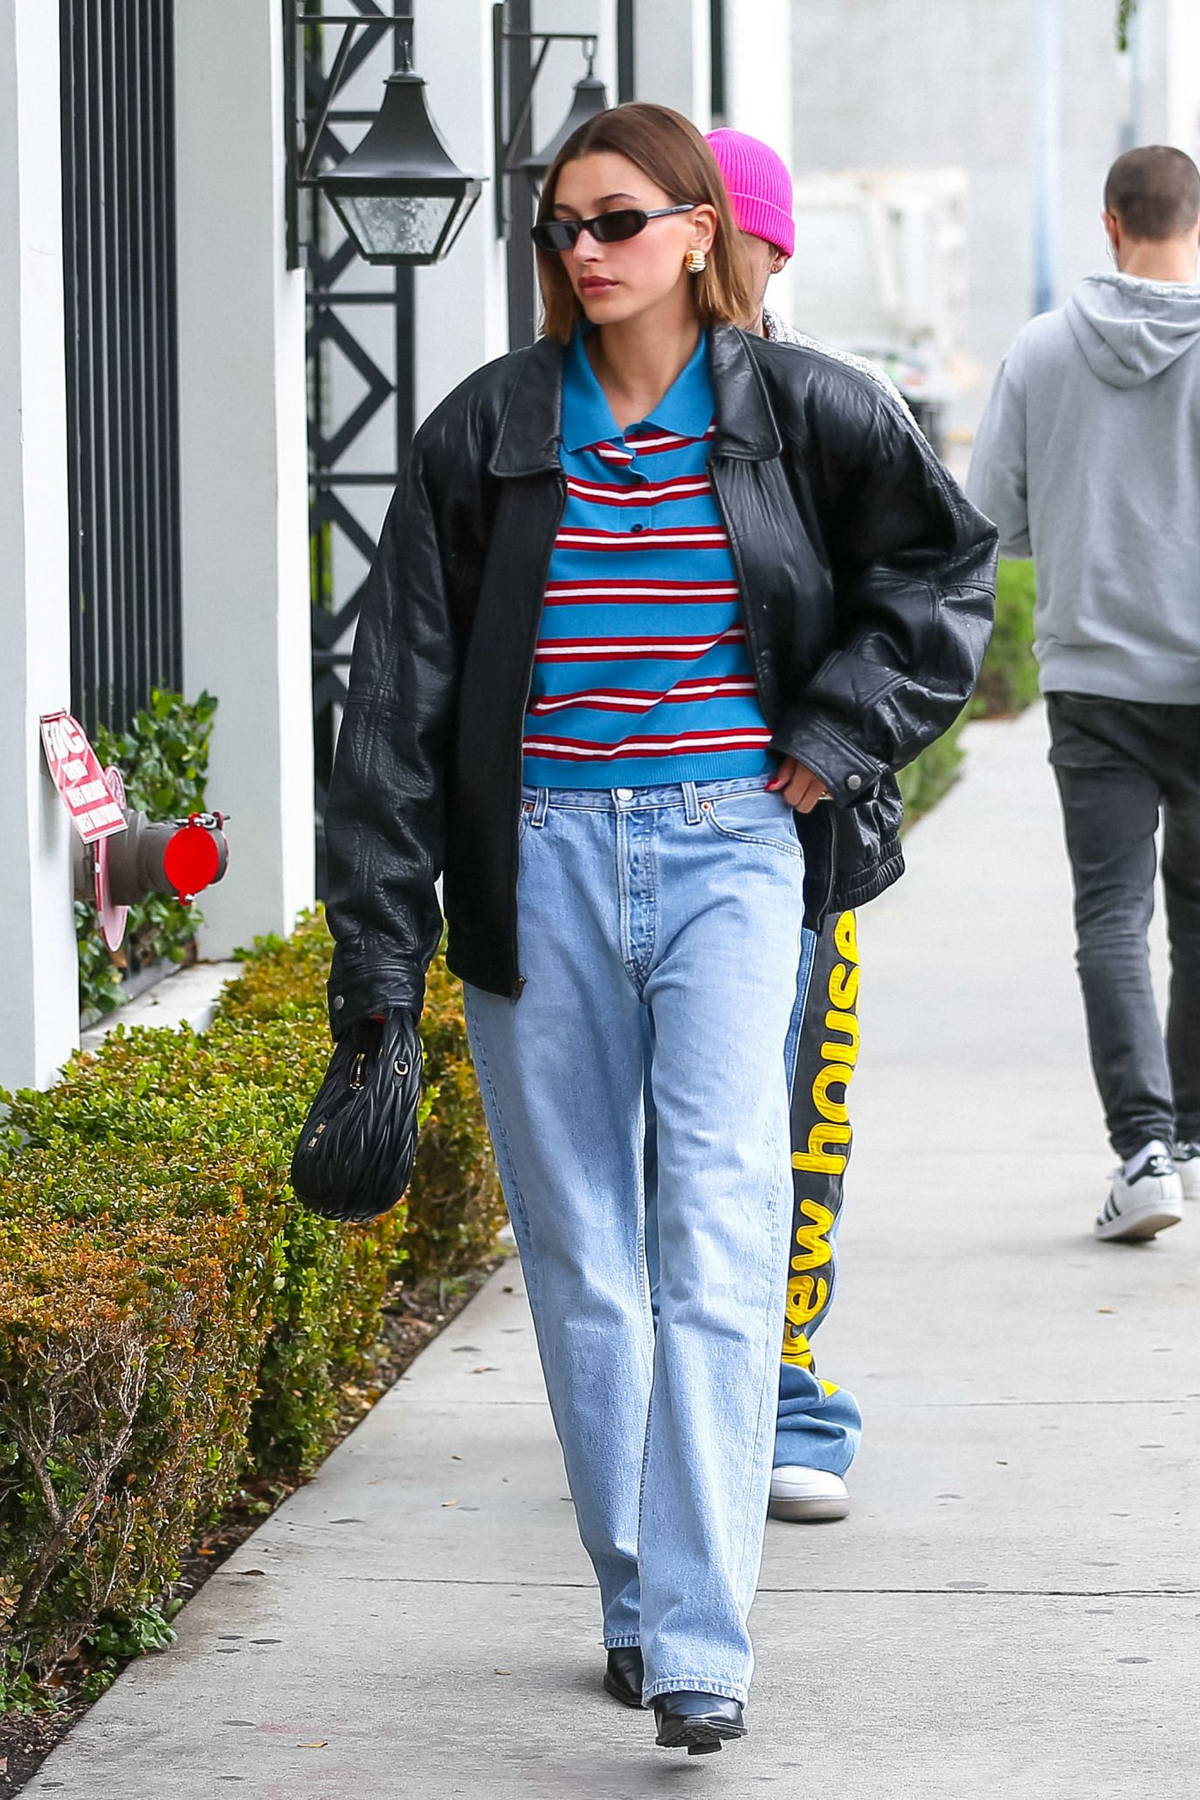 Rihanna and Hailey Bieber Wore the Same Polo-Style Shirt: Get the